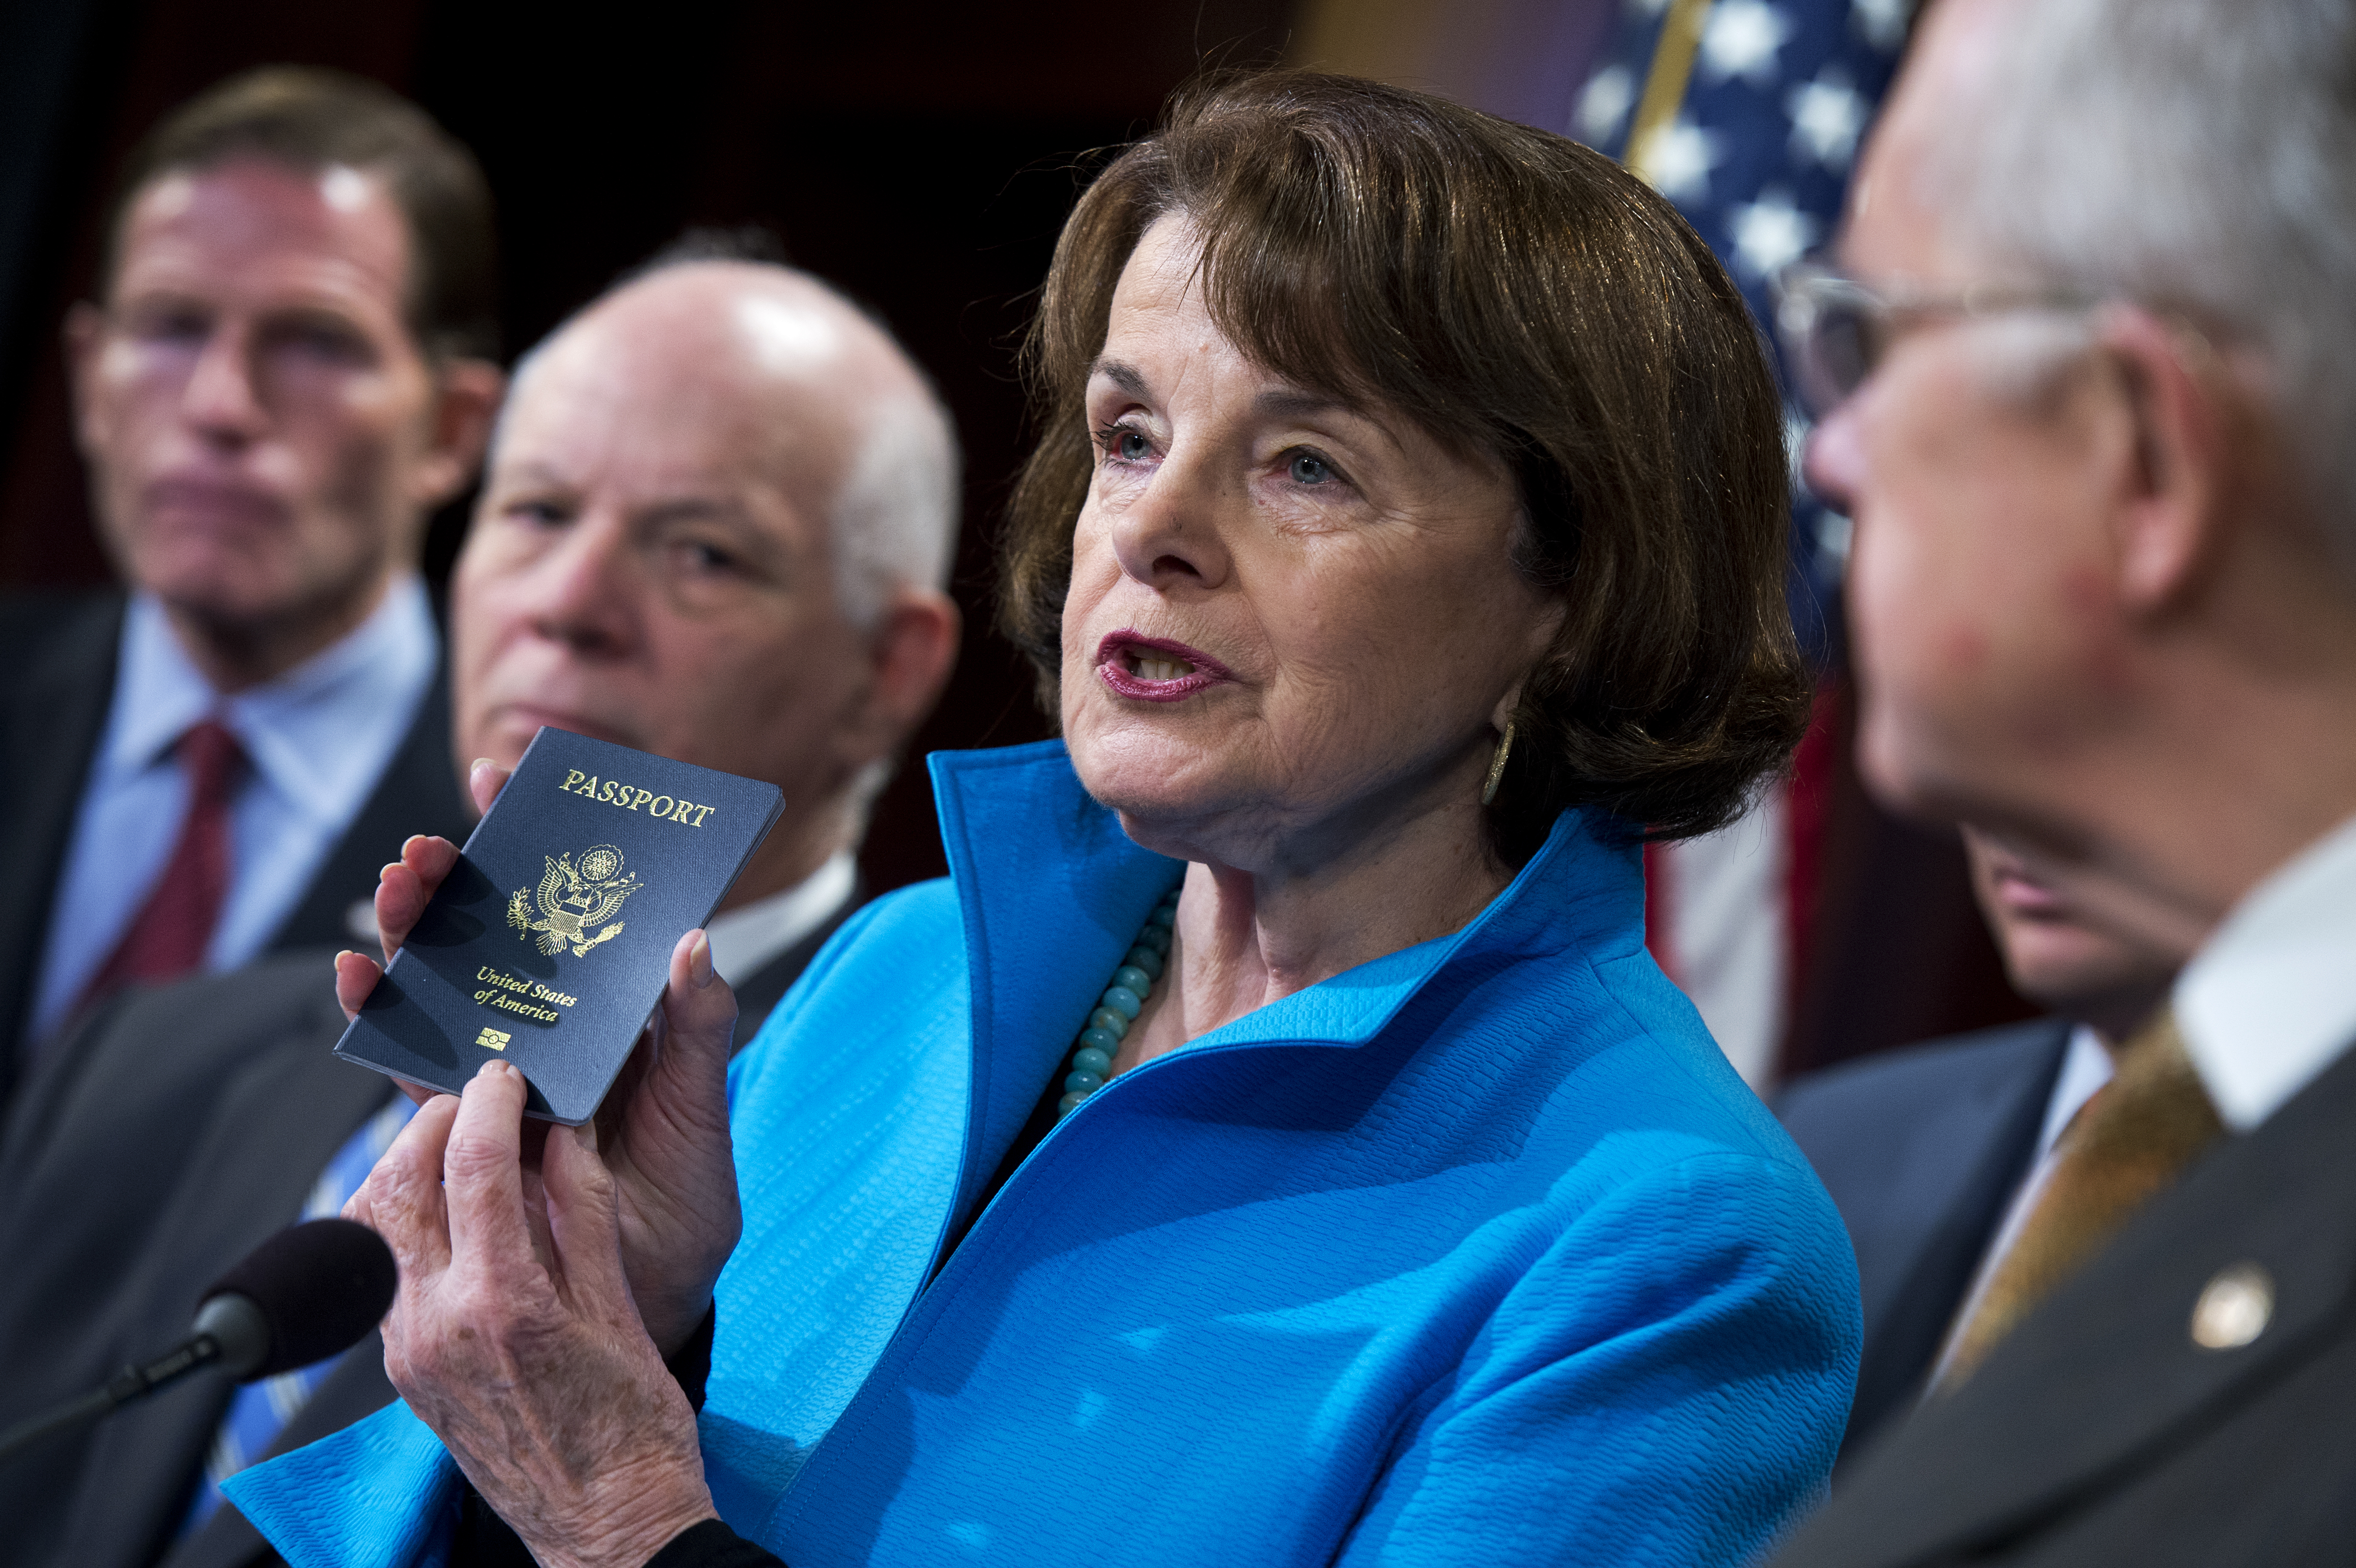 Dianne Feinstein, D-Calif., shows her passport during a news conference on closing loopholes in the Visa Waiver Program, Nov. 19, 2015. (Tom Williams—CQ Roll Call/AP)